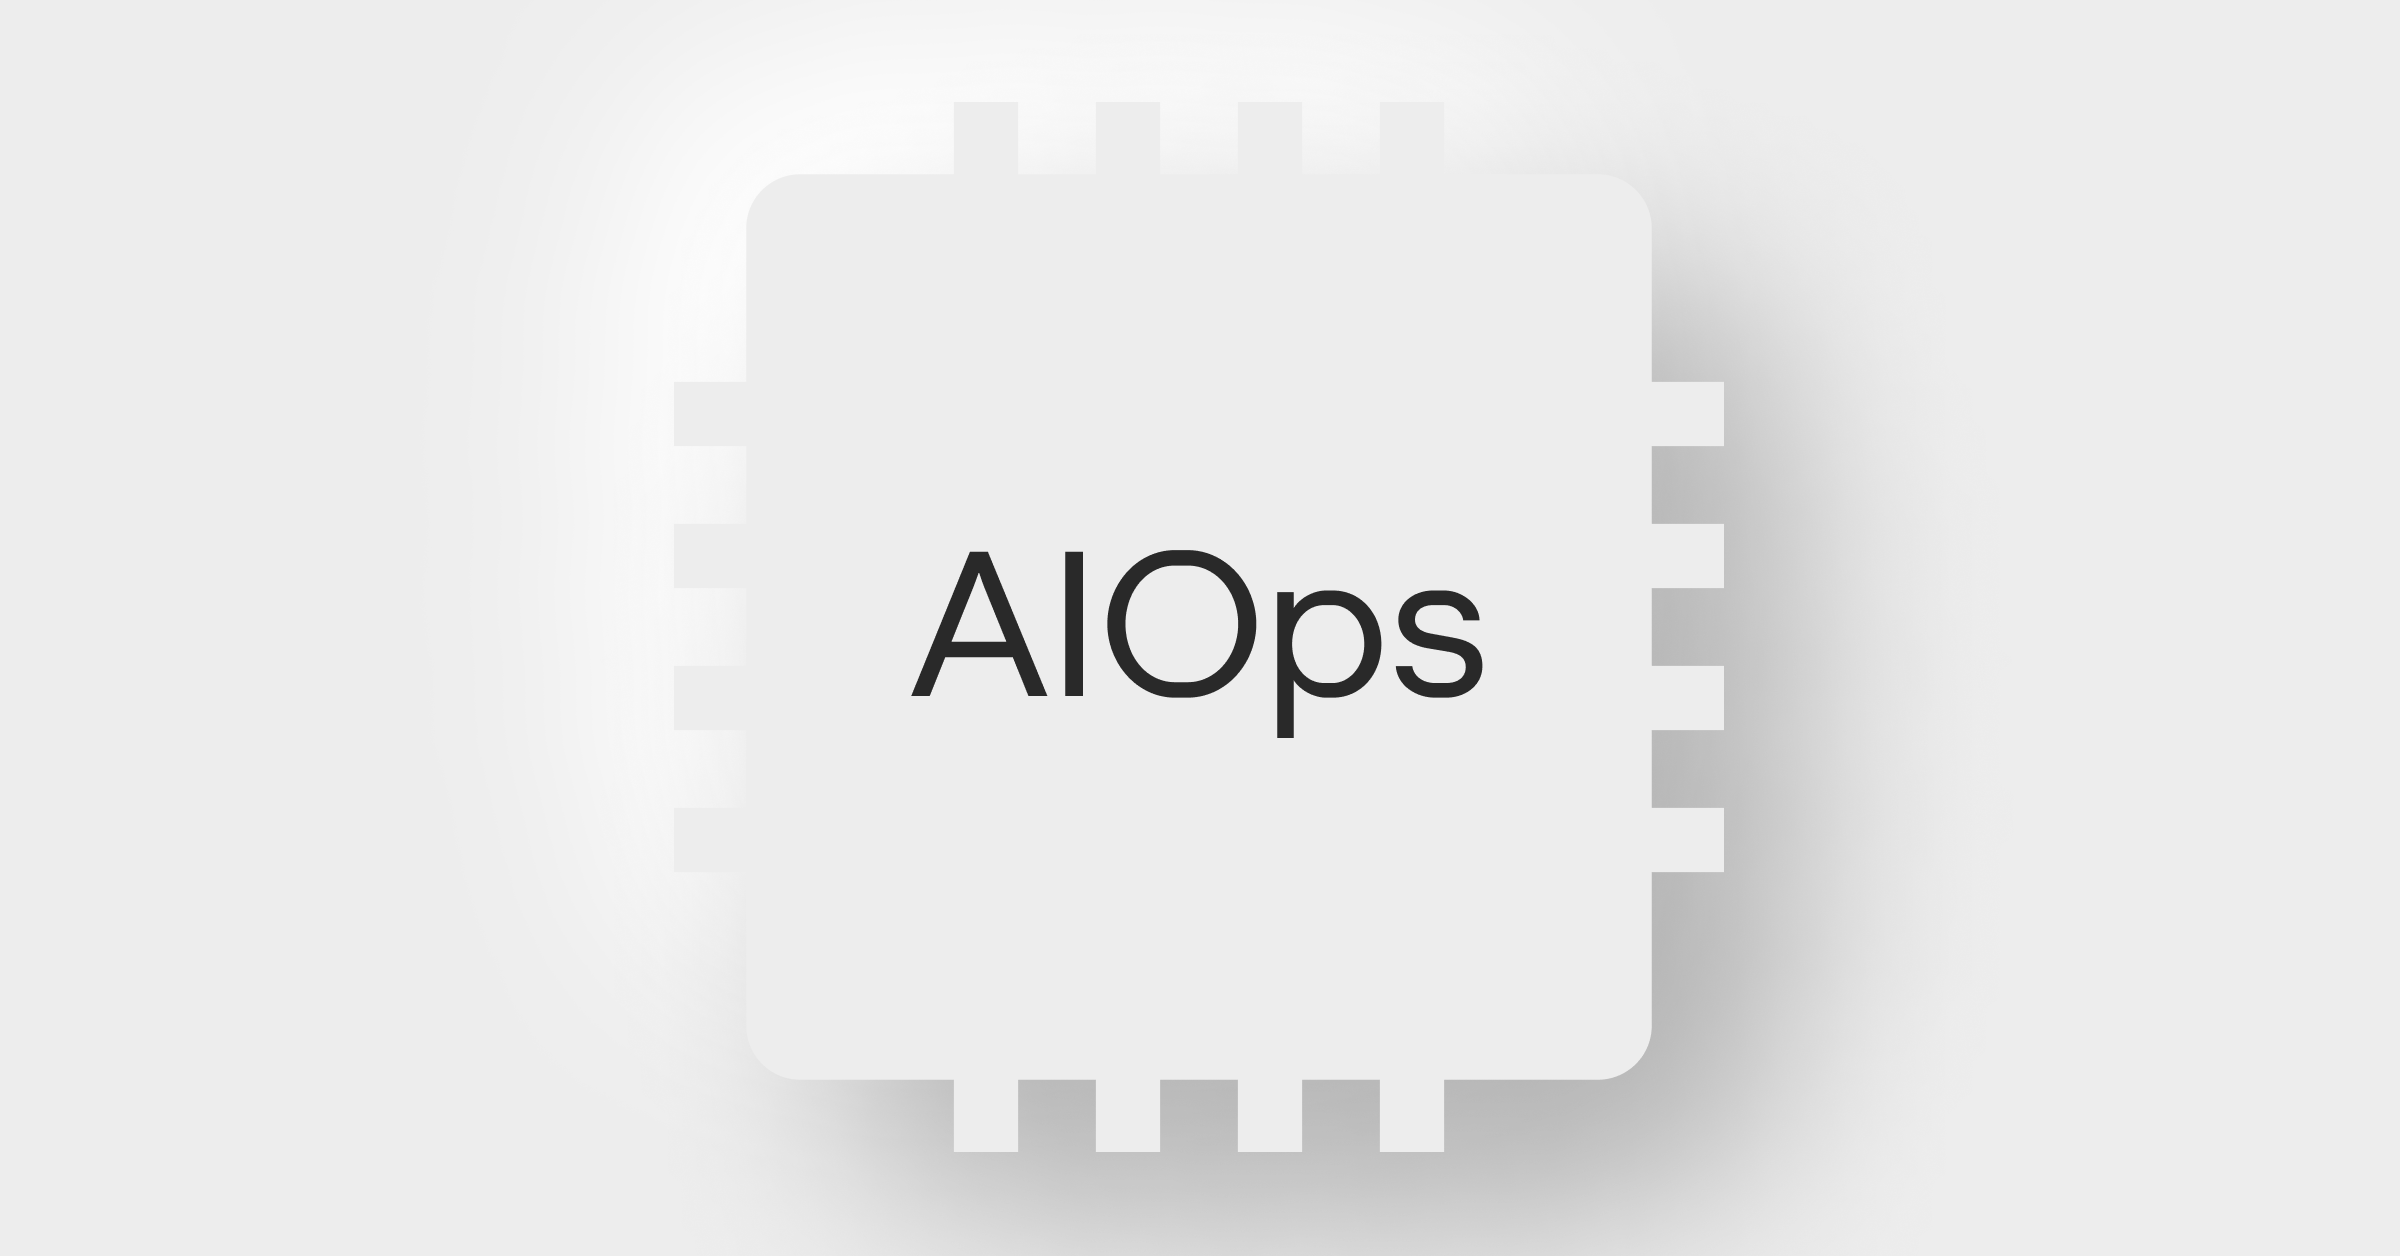 What is AIOps? Use cases, benefits, and getting started